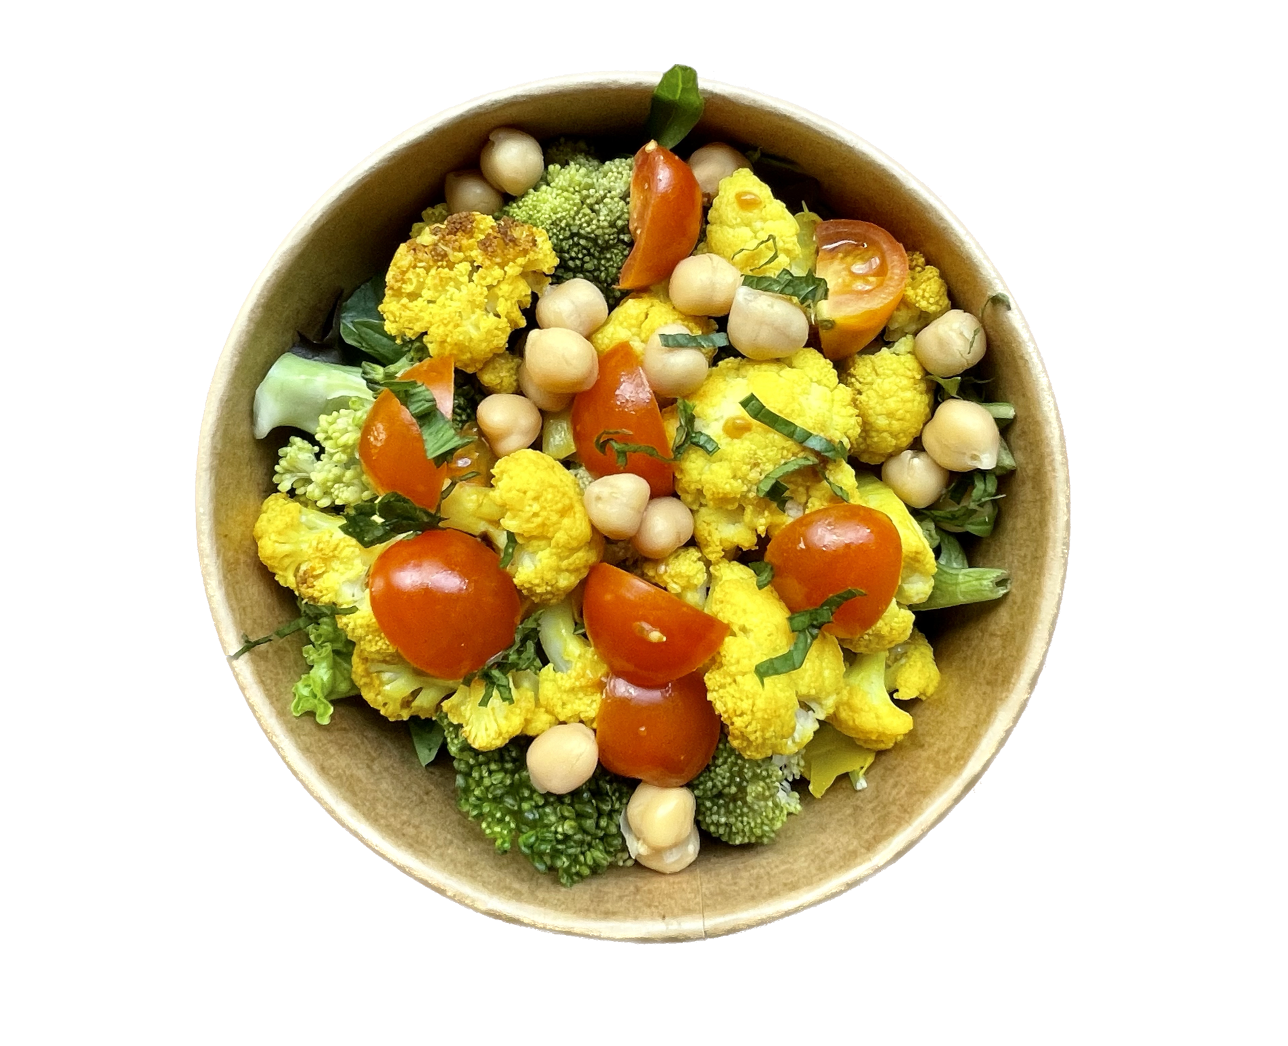 Spiced Cauliflower and Broccoli Salad Individual Bowl Sydney Catering